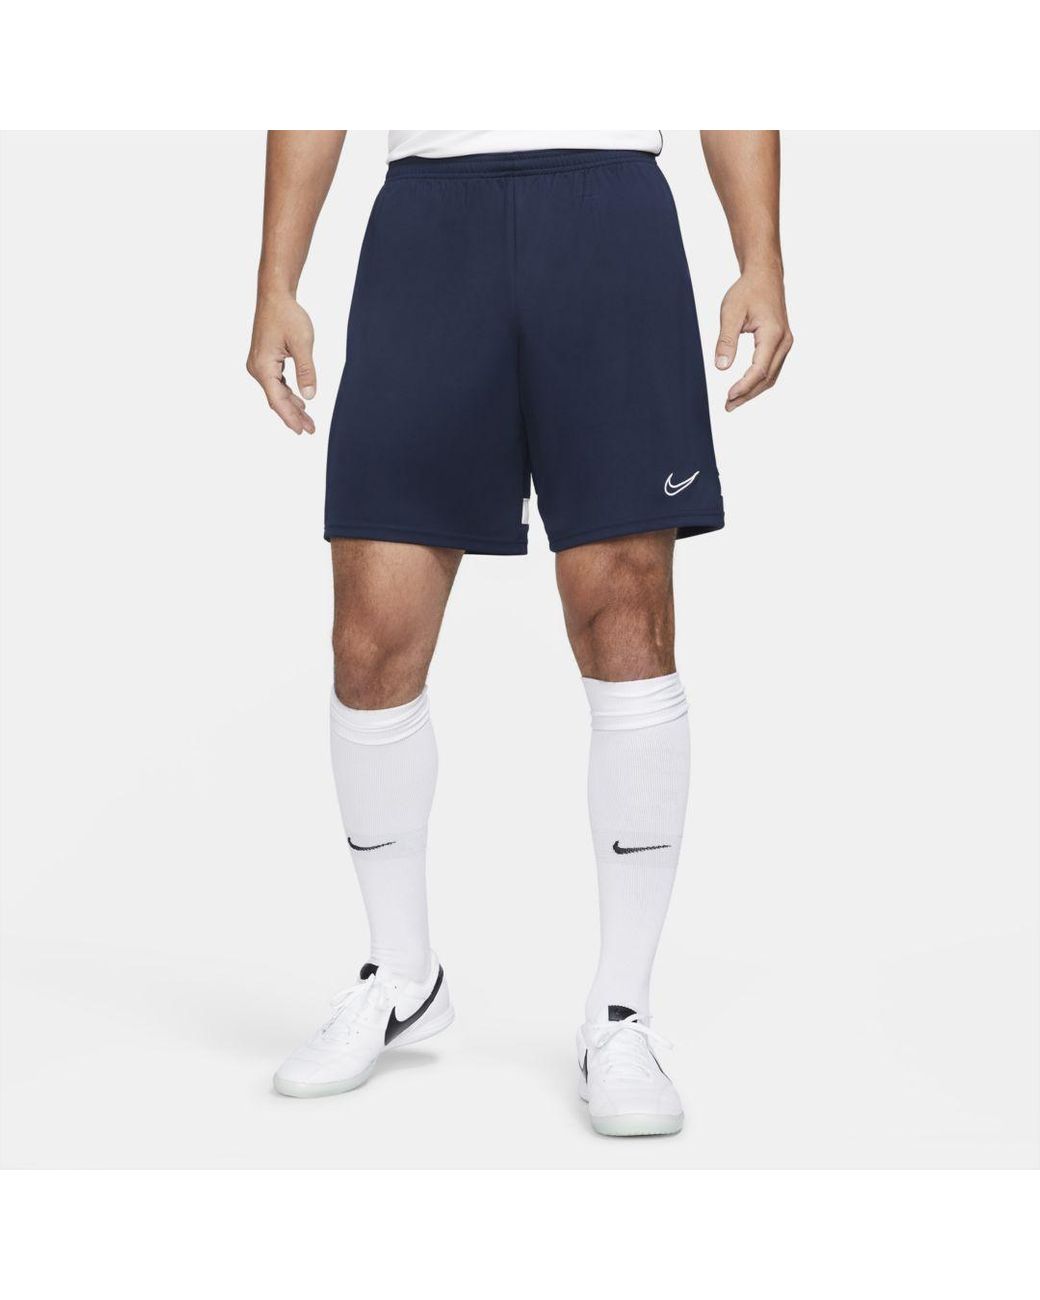 Nike Synthetic Dri-fit Academy Knit Soccer Shorts in White for Men - Lyst